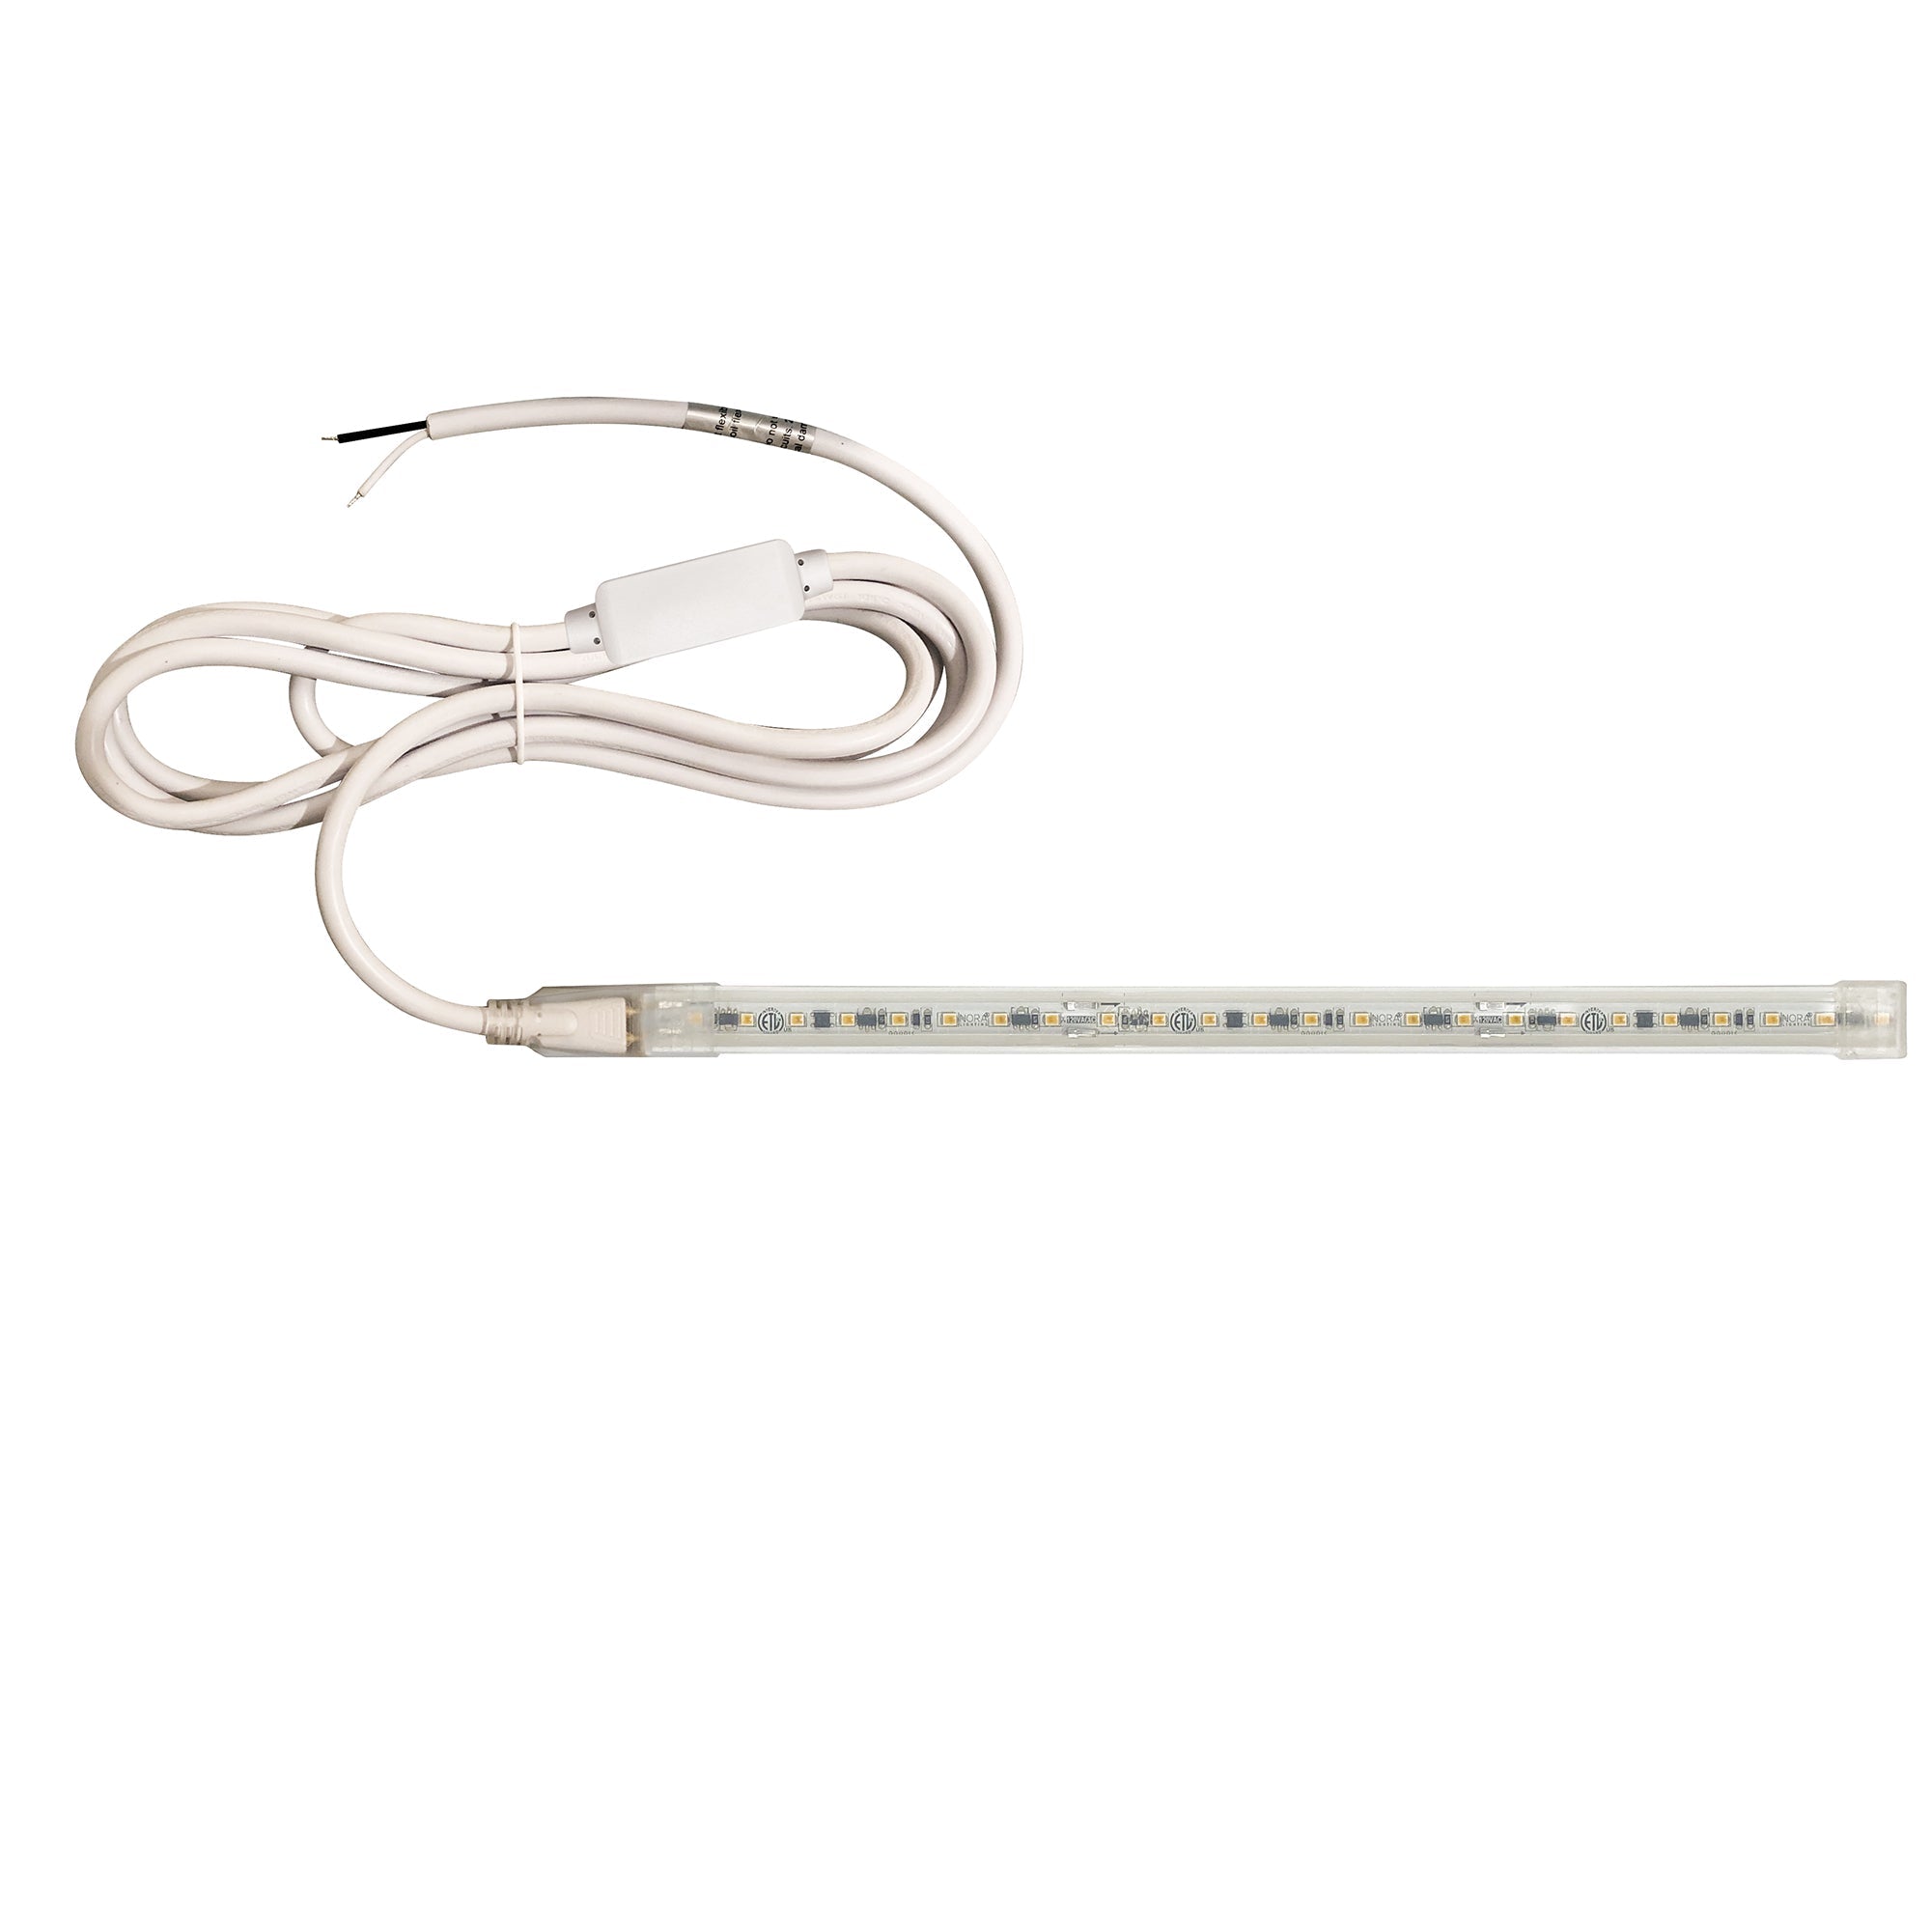 Nora Lighting NUTP13-W99-4-12-930/HWSP - Accent / Undercabinet - Custom Cut 99-ft, 4-in 120V Continuous LED Tape Light, 330lm / 3.6W per foot, 3000K, w/ Mounting Clips and 8' Hardwired Power Cord w/ Surge Protector